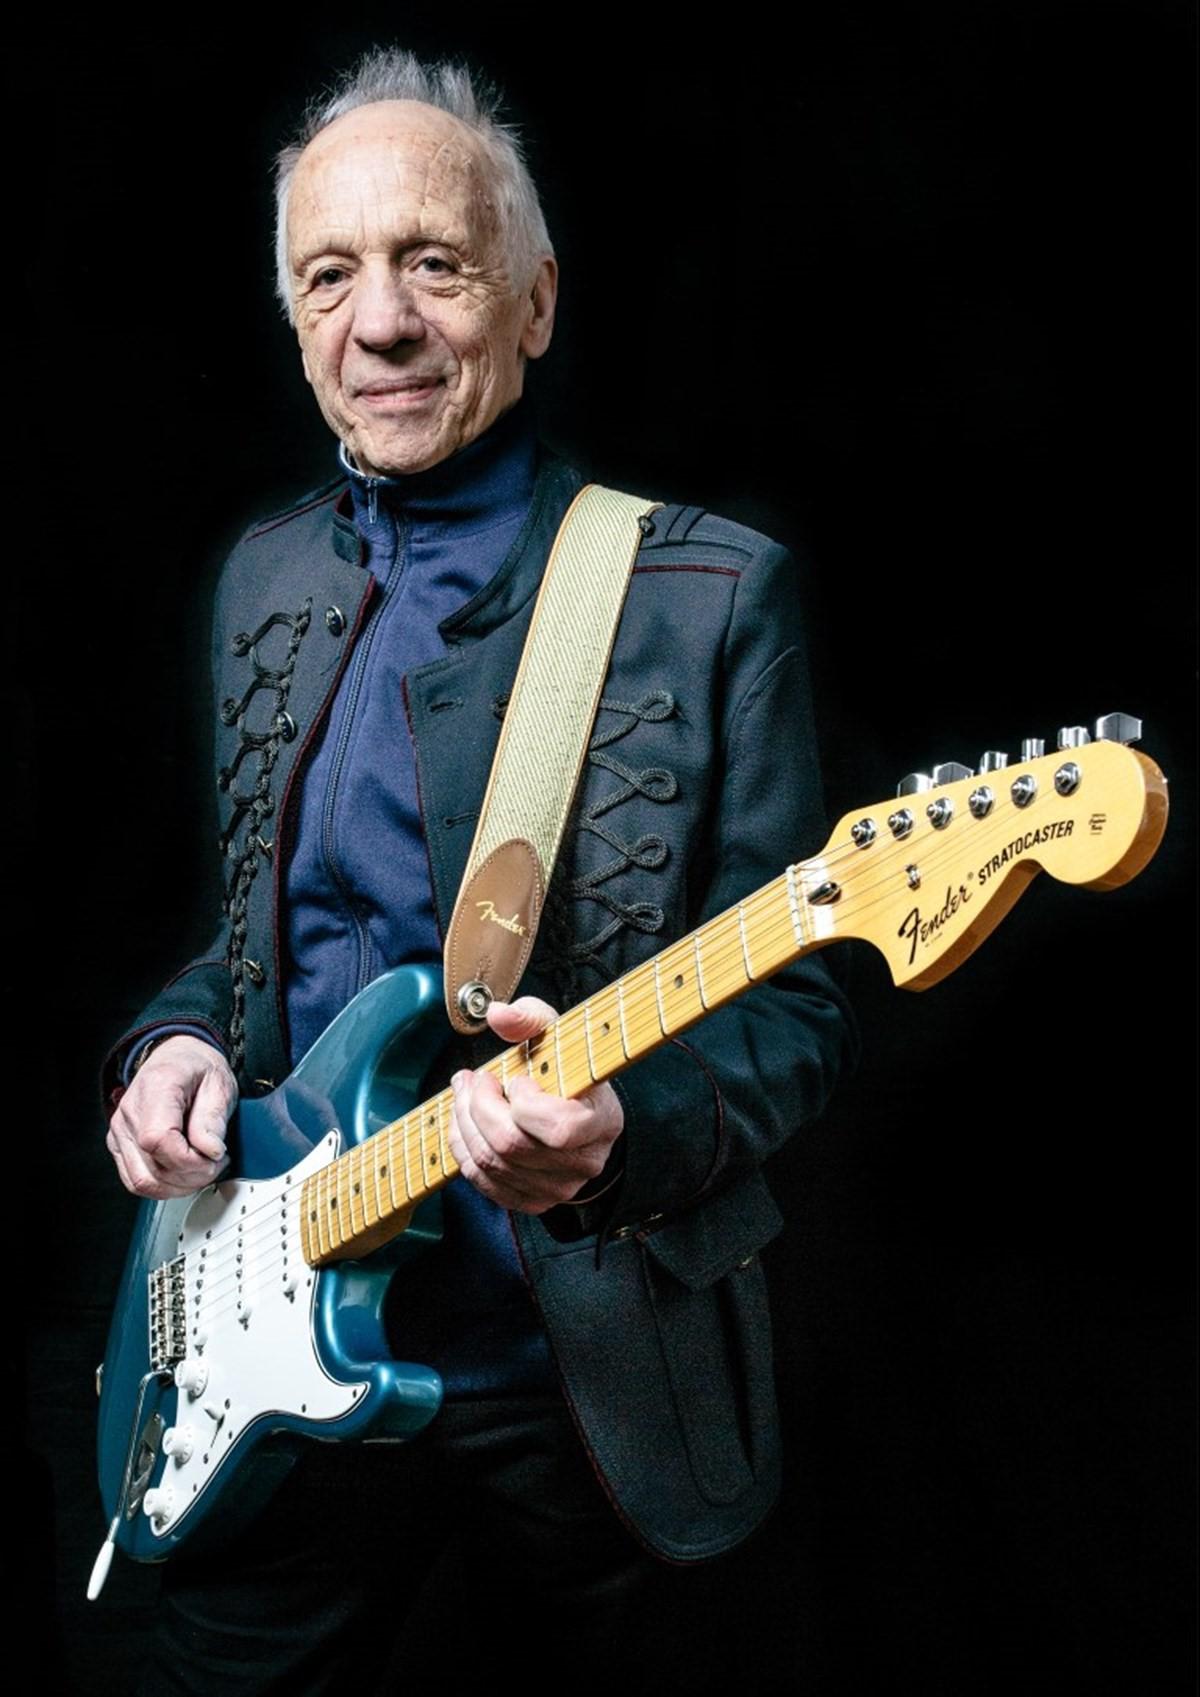 Concert Connection: Legendary Robin Trower brings guitar to Ridgefield